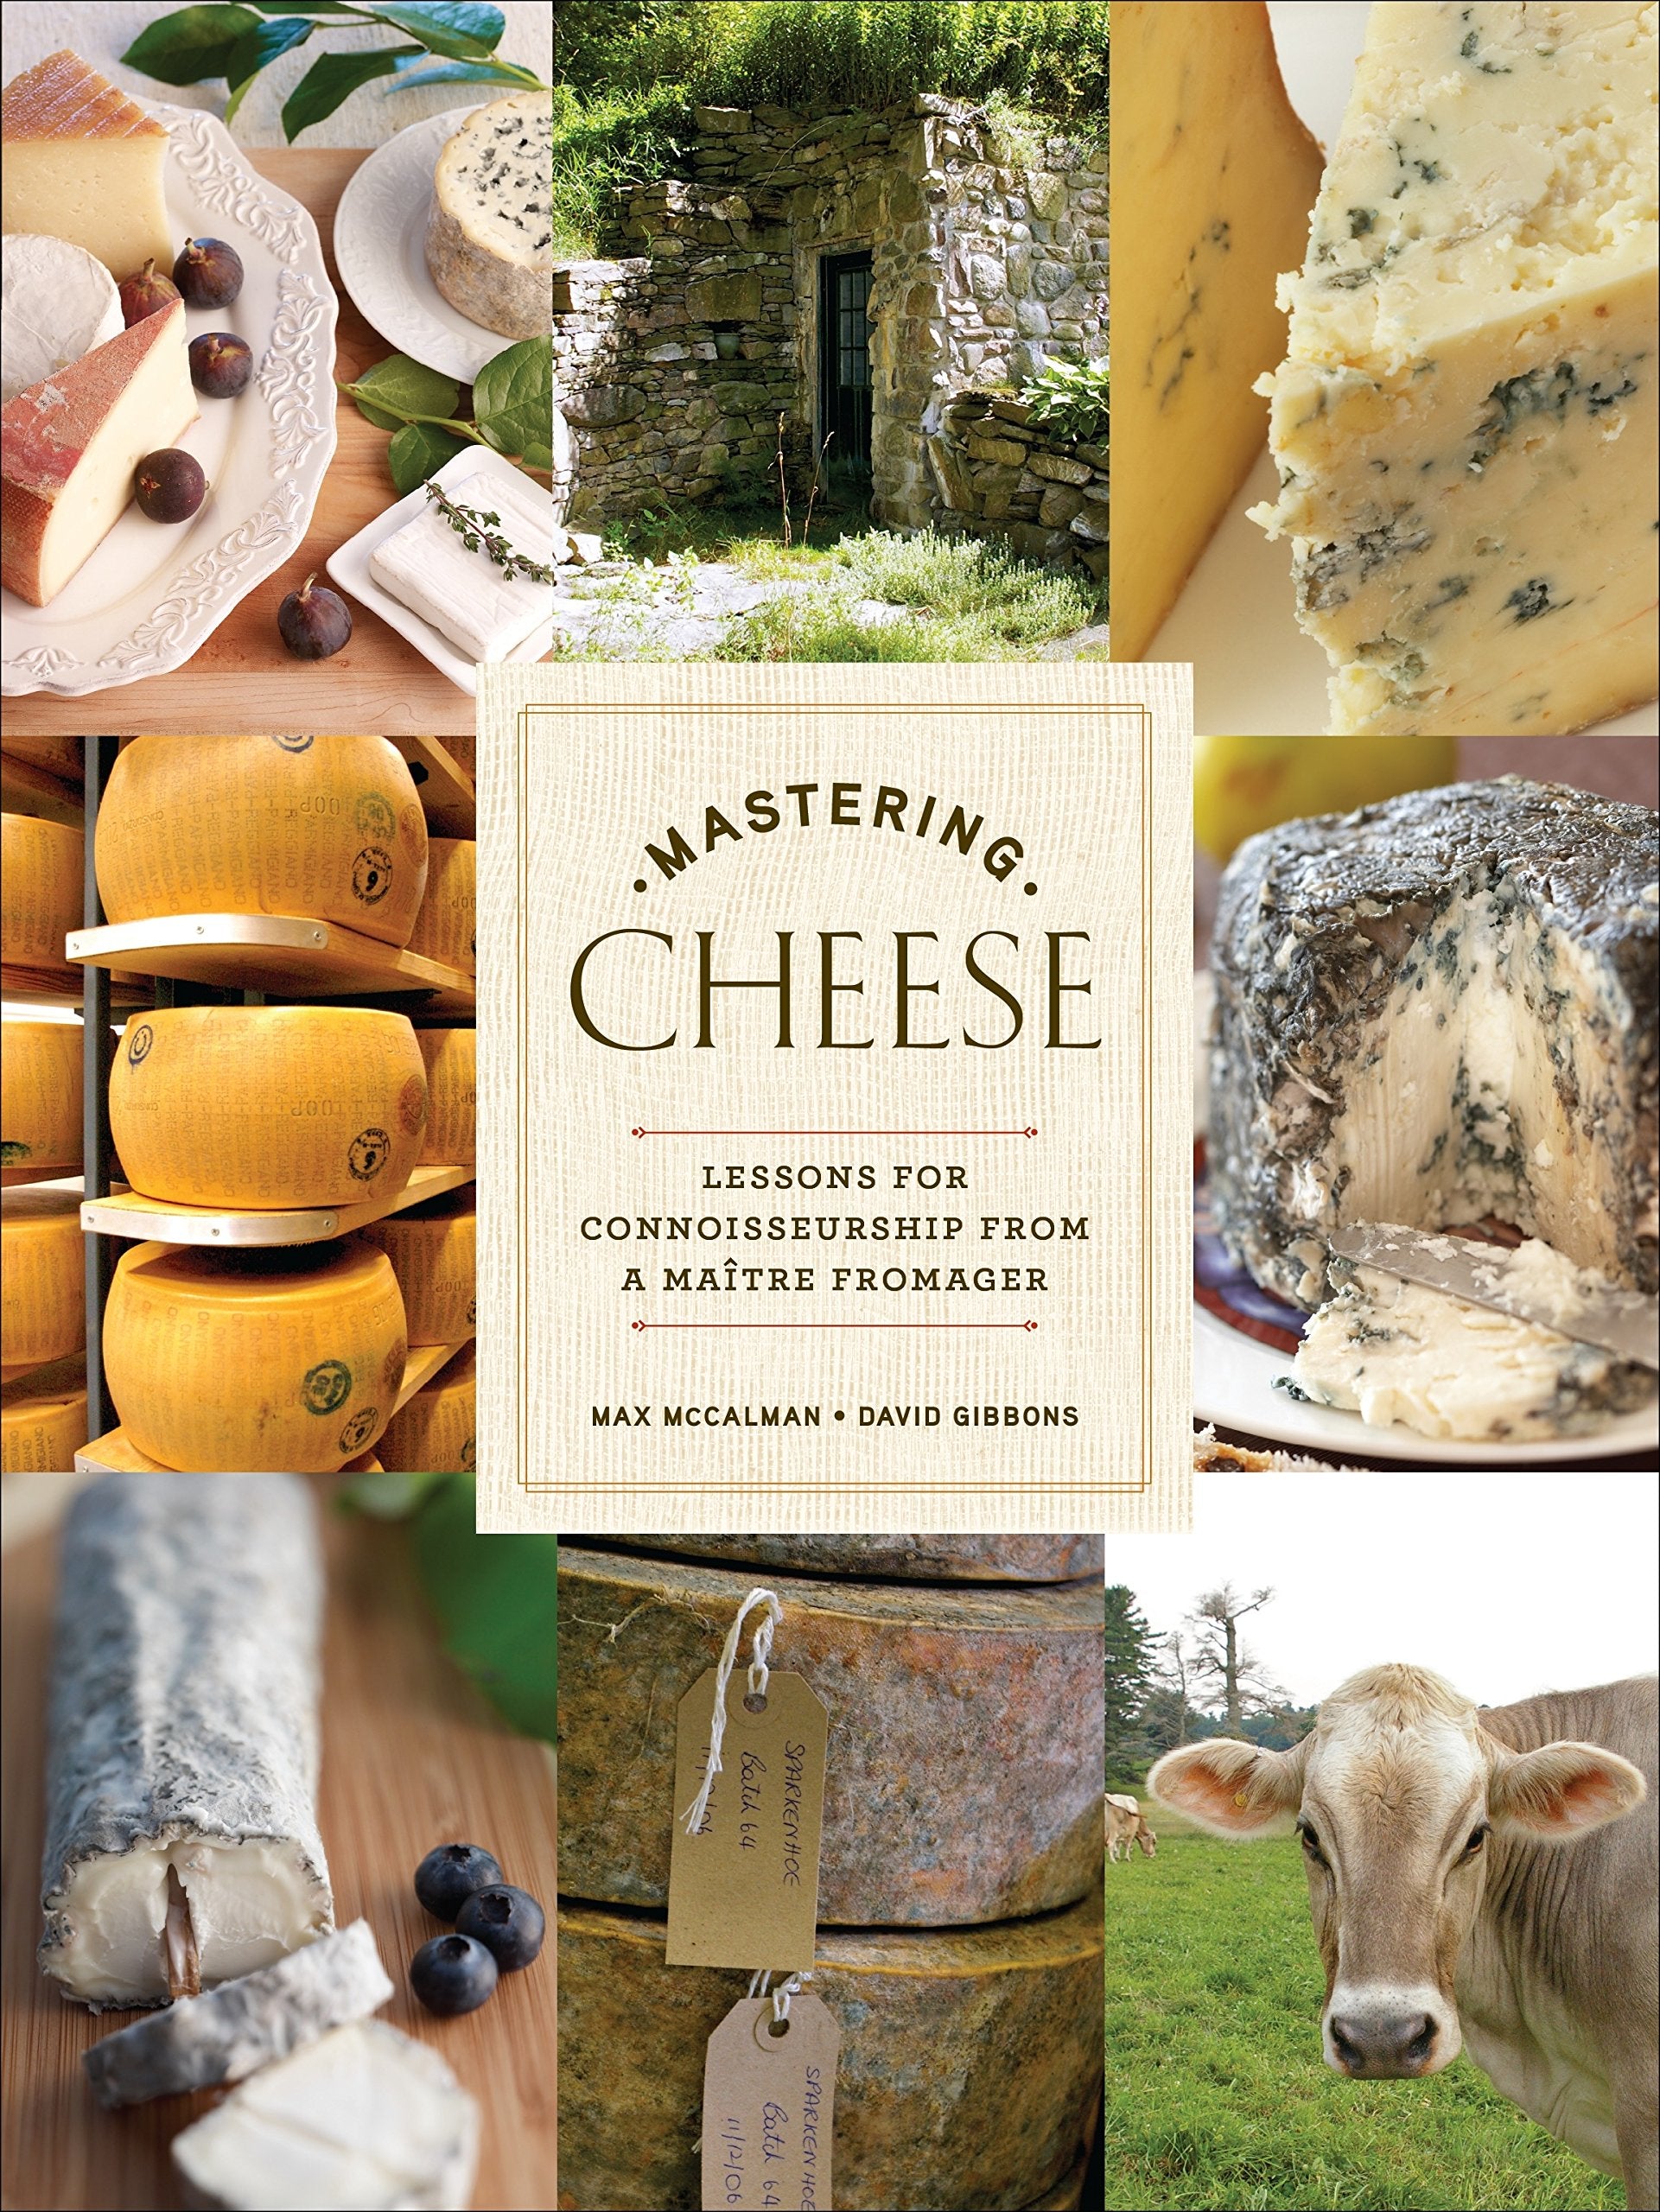 Mastering Cheese: Lessons for Connoisseurship from a Maître Fromager (Max McCalman, David Gibbons)